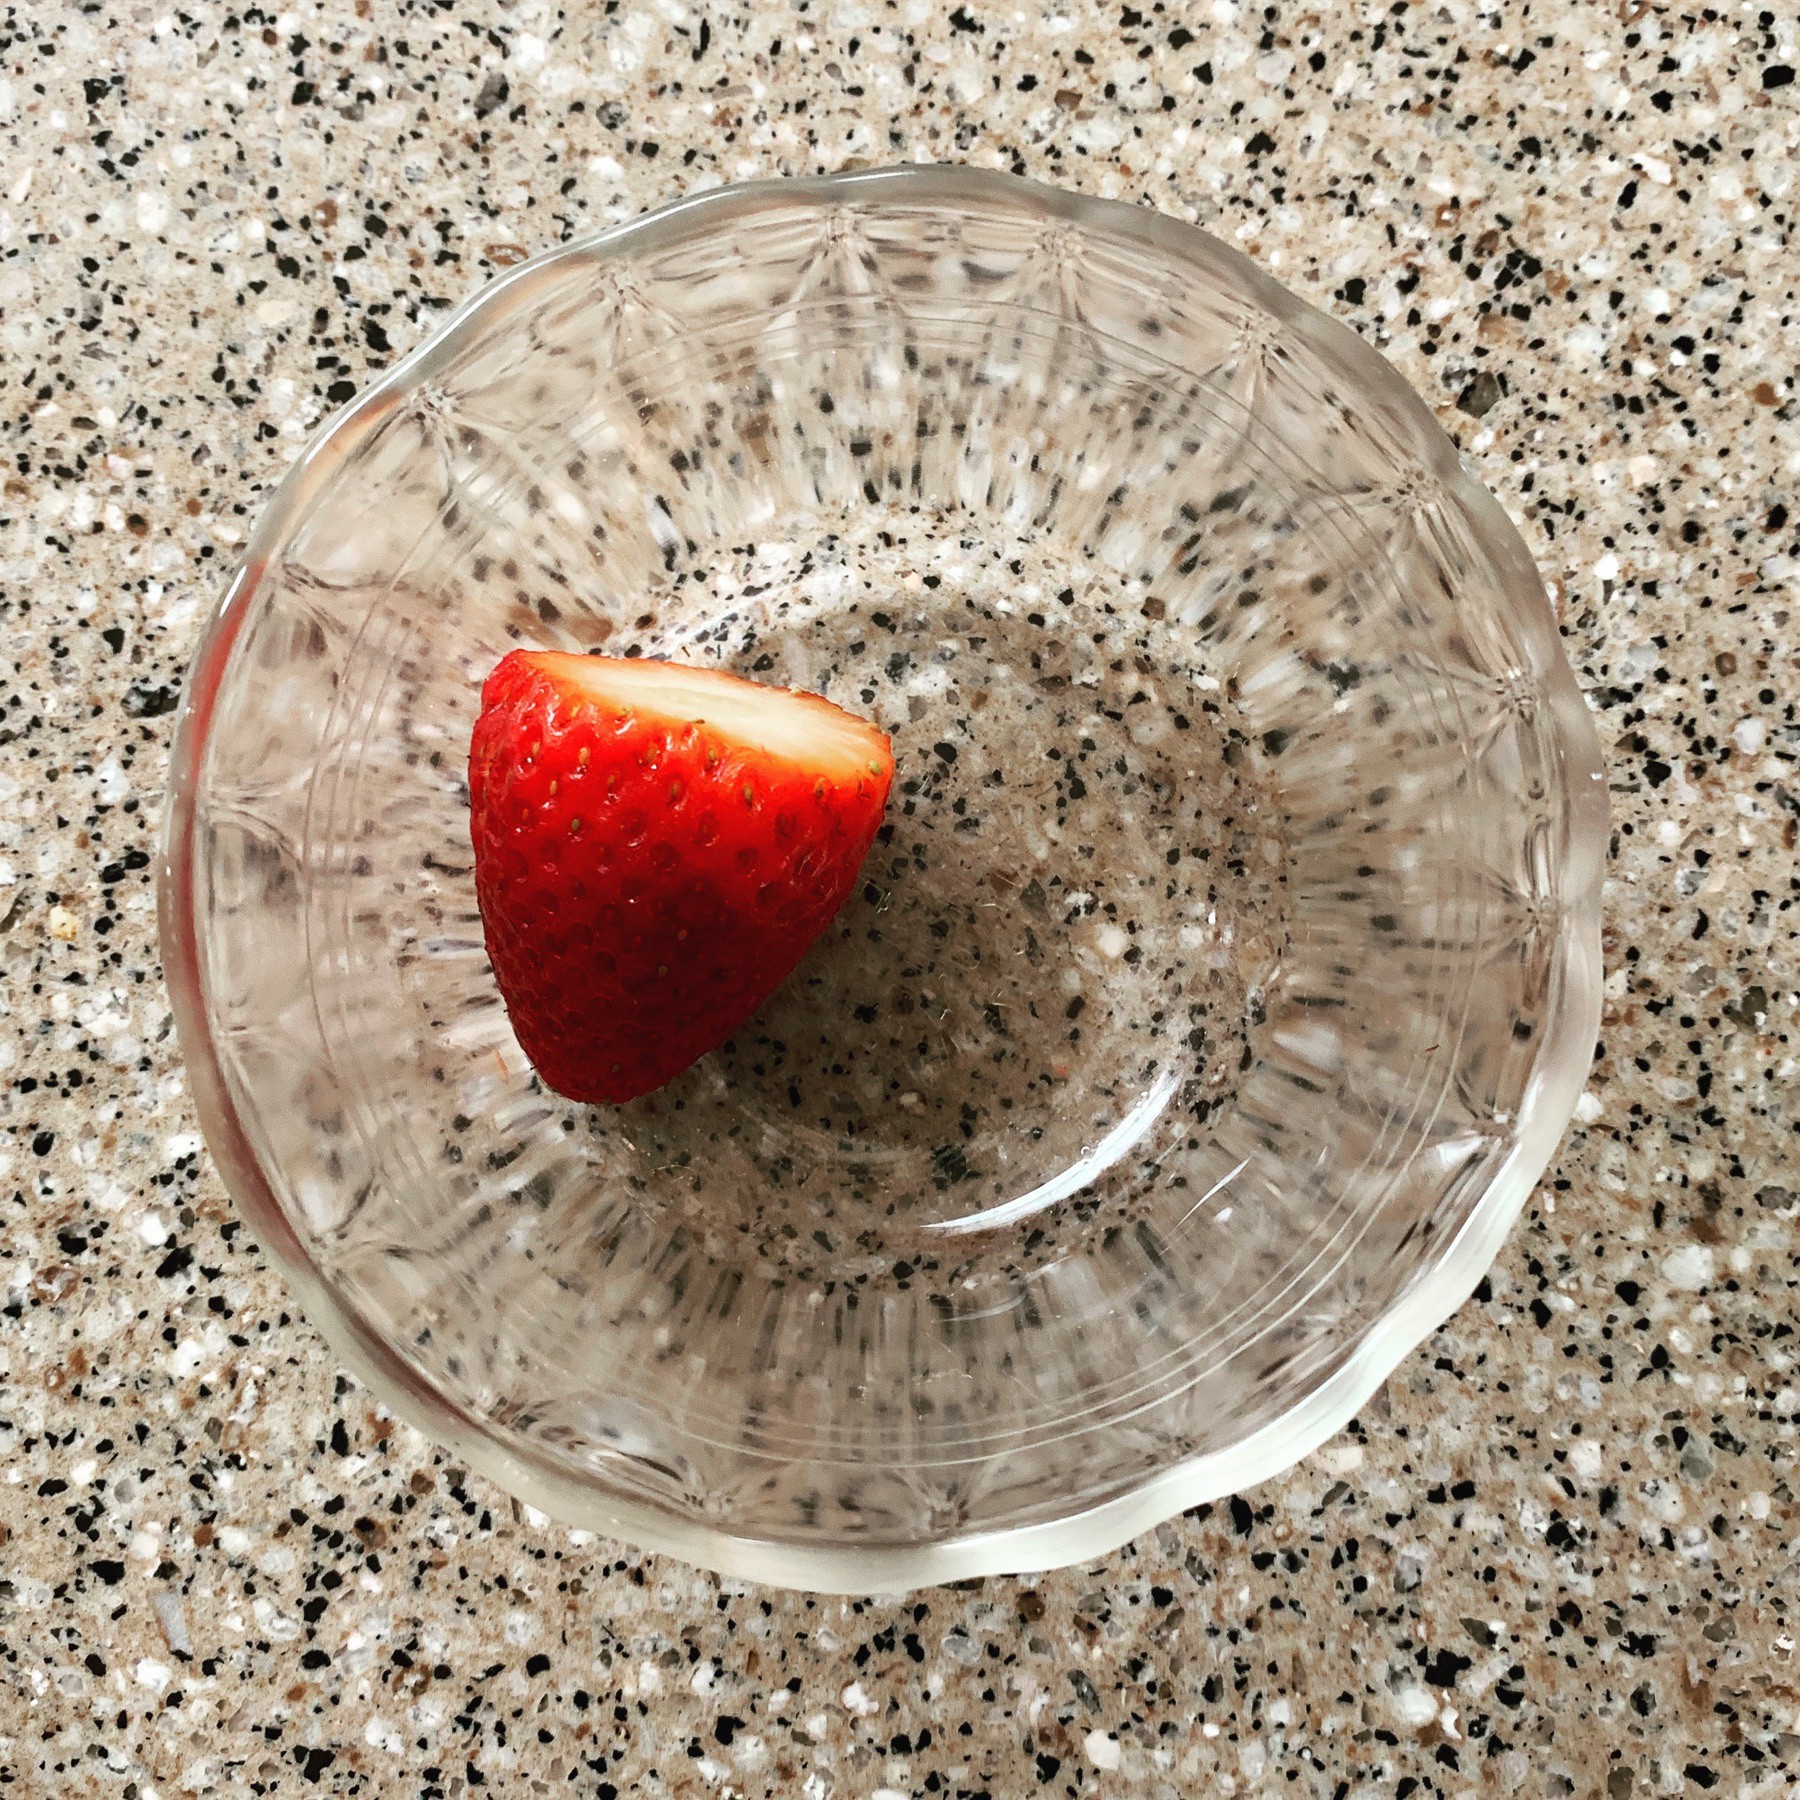 a single strawberry in a glass bowl